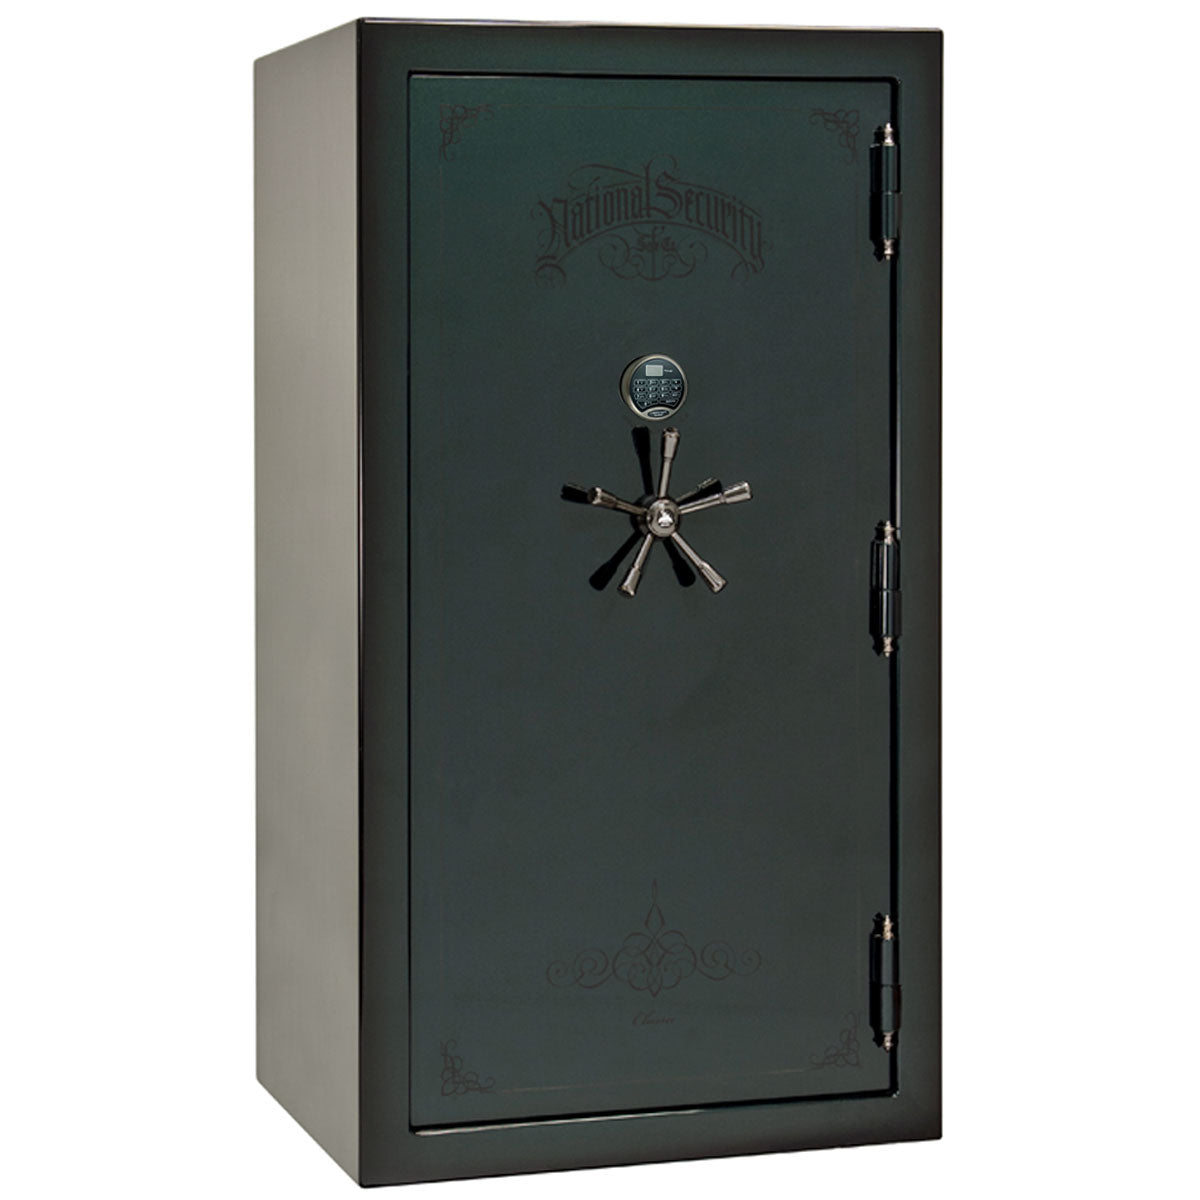 Liberty Safe Classic Plus 40 in Feathered Green Gloss with Black Chrome Electronic Lock, closed door.